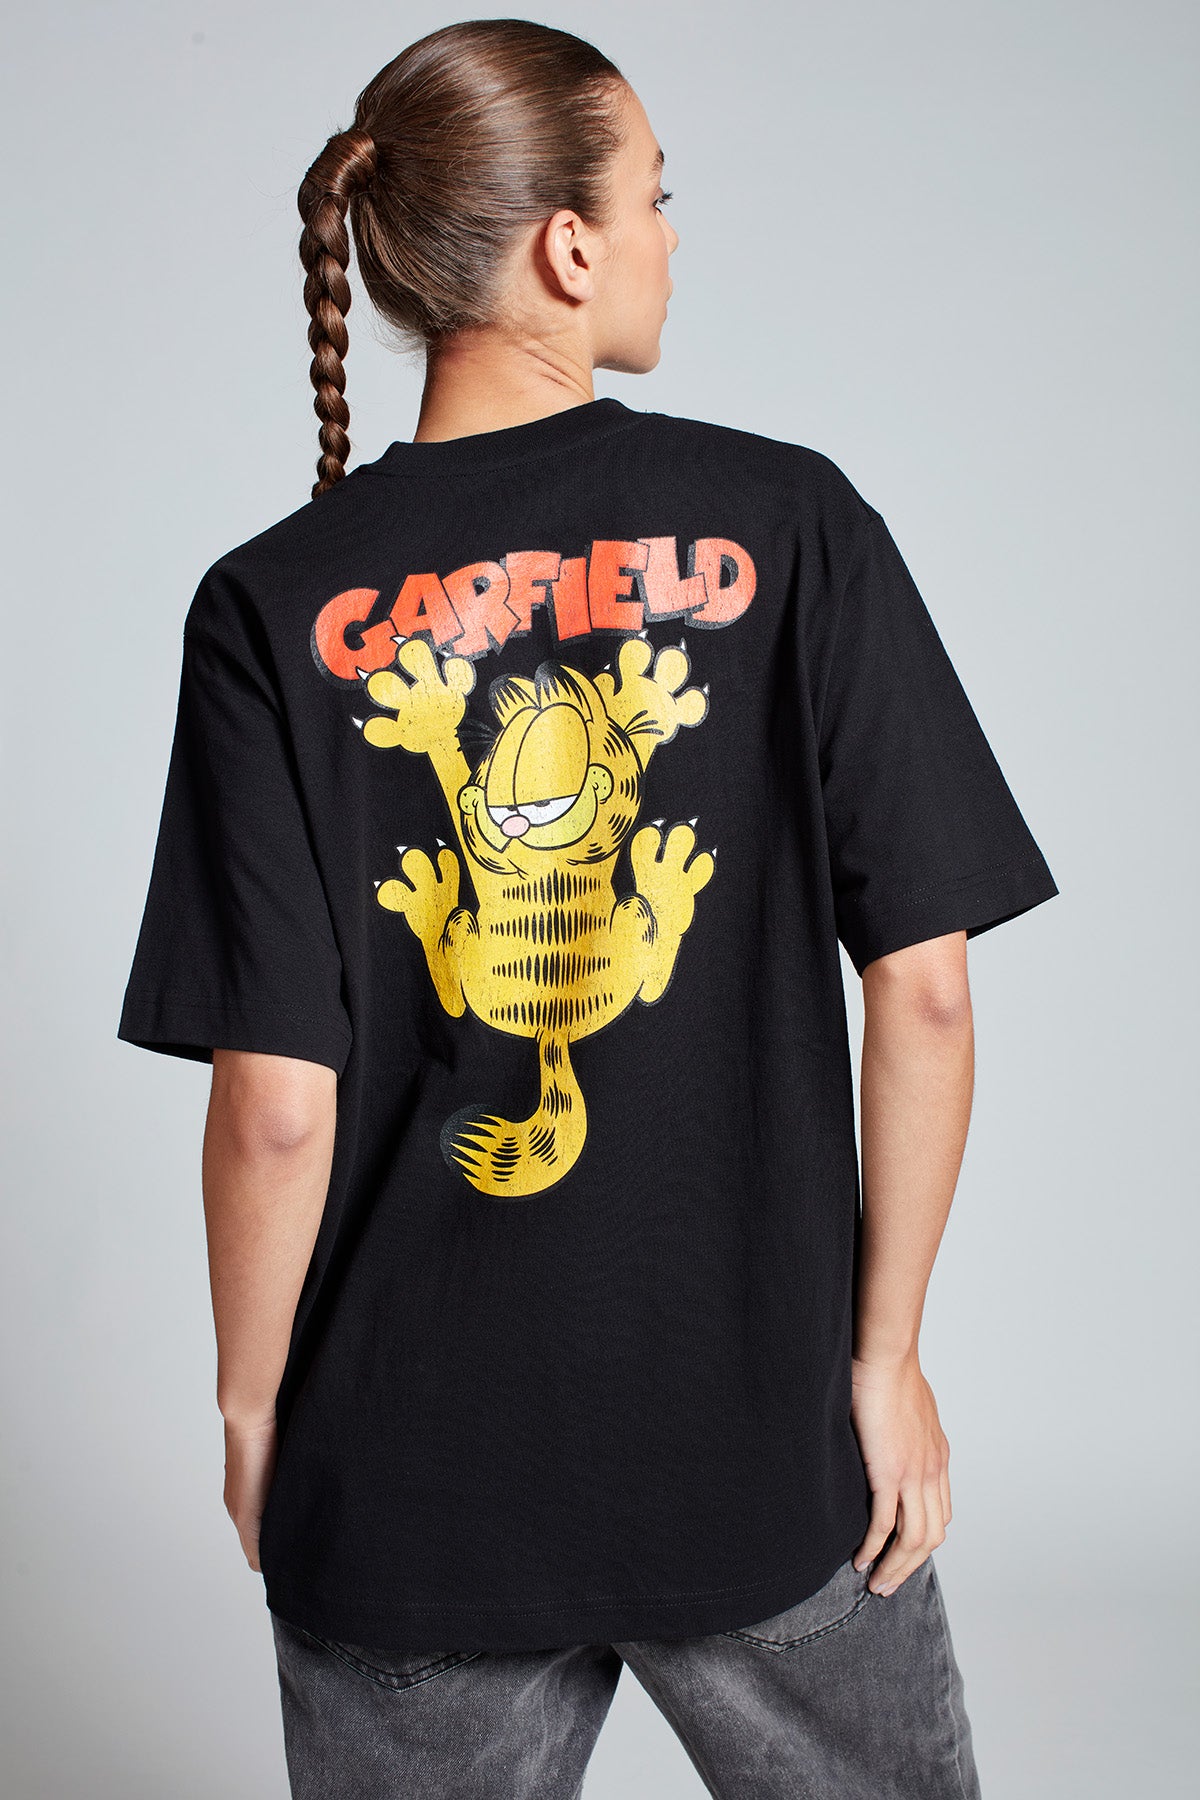 Garfield Watch Your Back T-shirt in Black